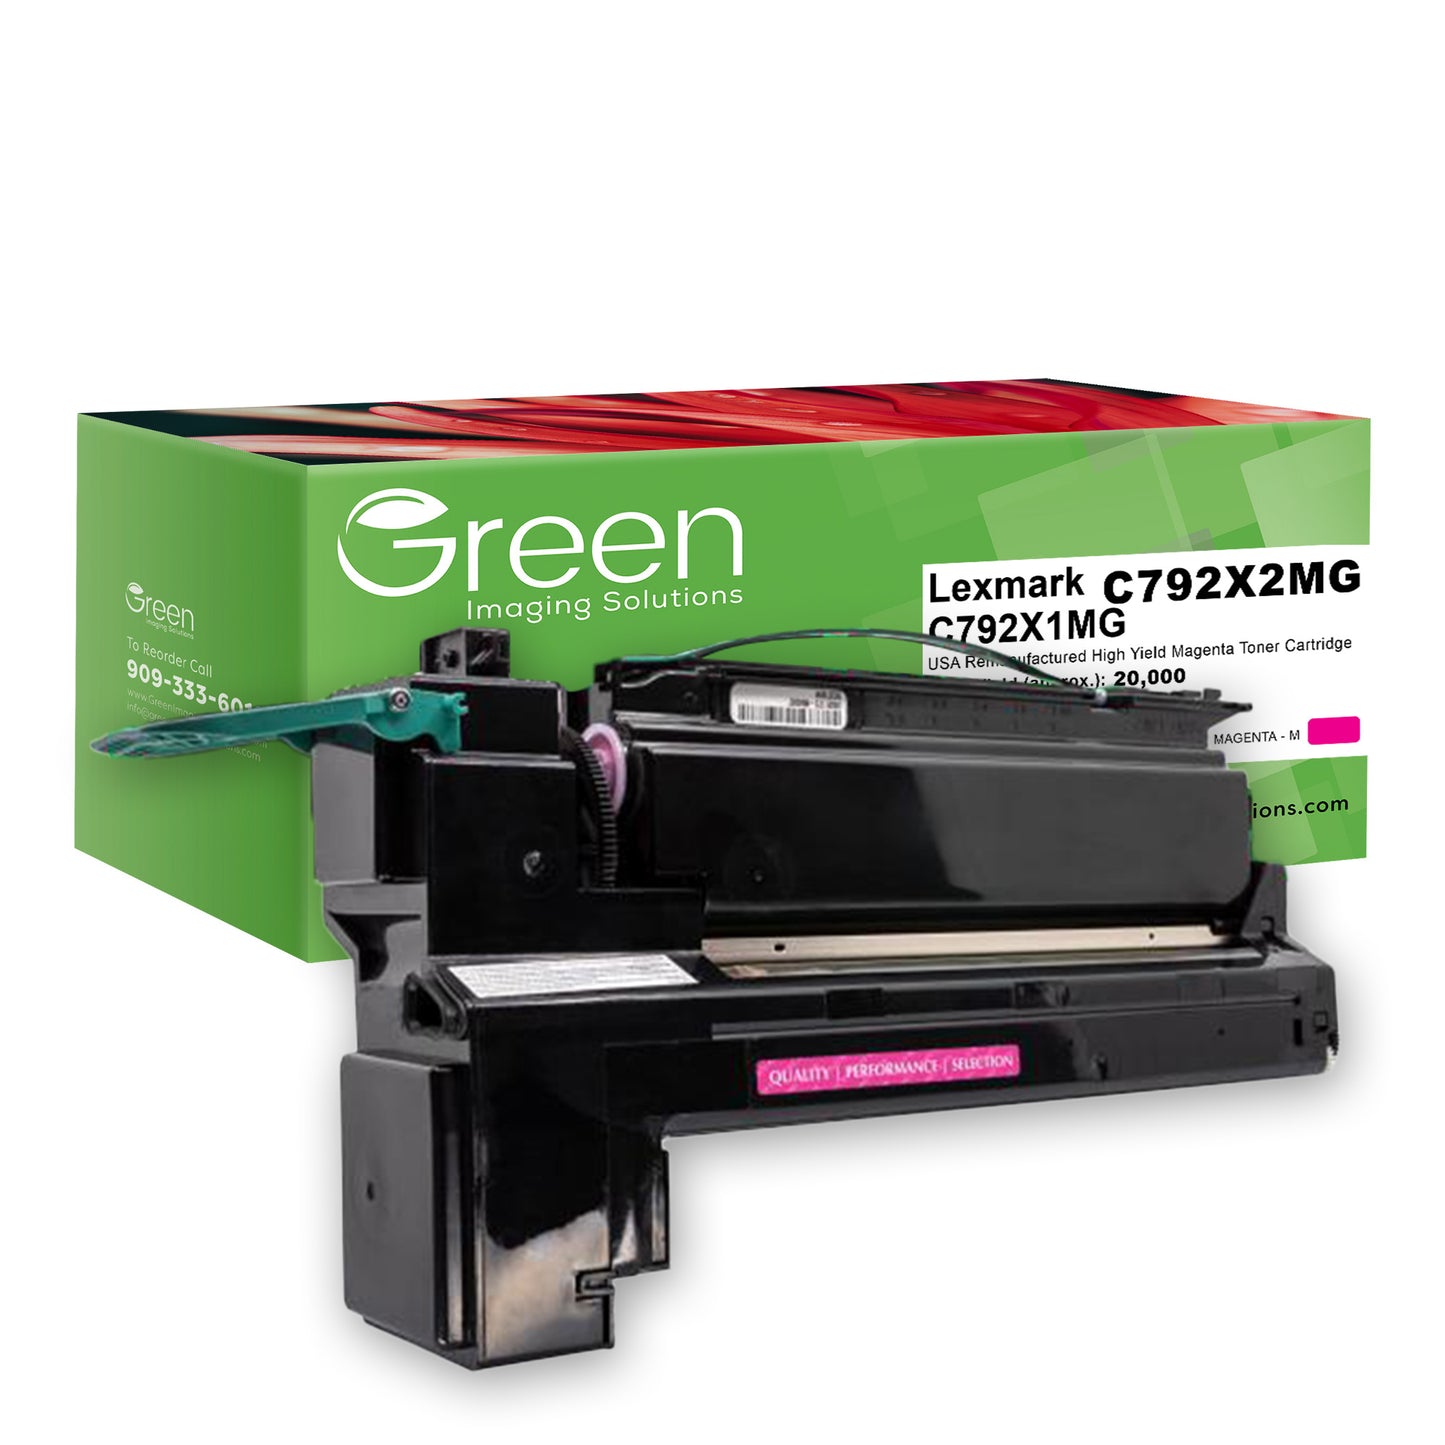 Green Imaging Solutions USA Remanufactured High Yield Magenta Toner Cartridge for Lexmark C792